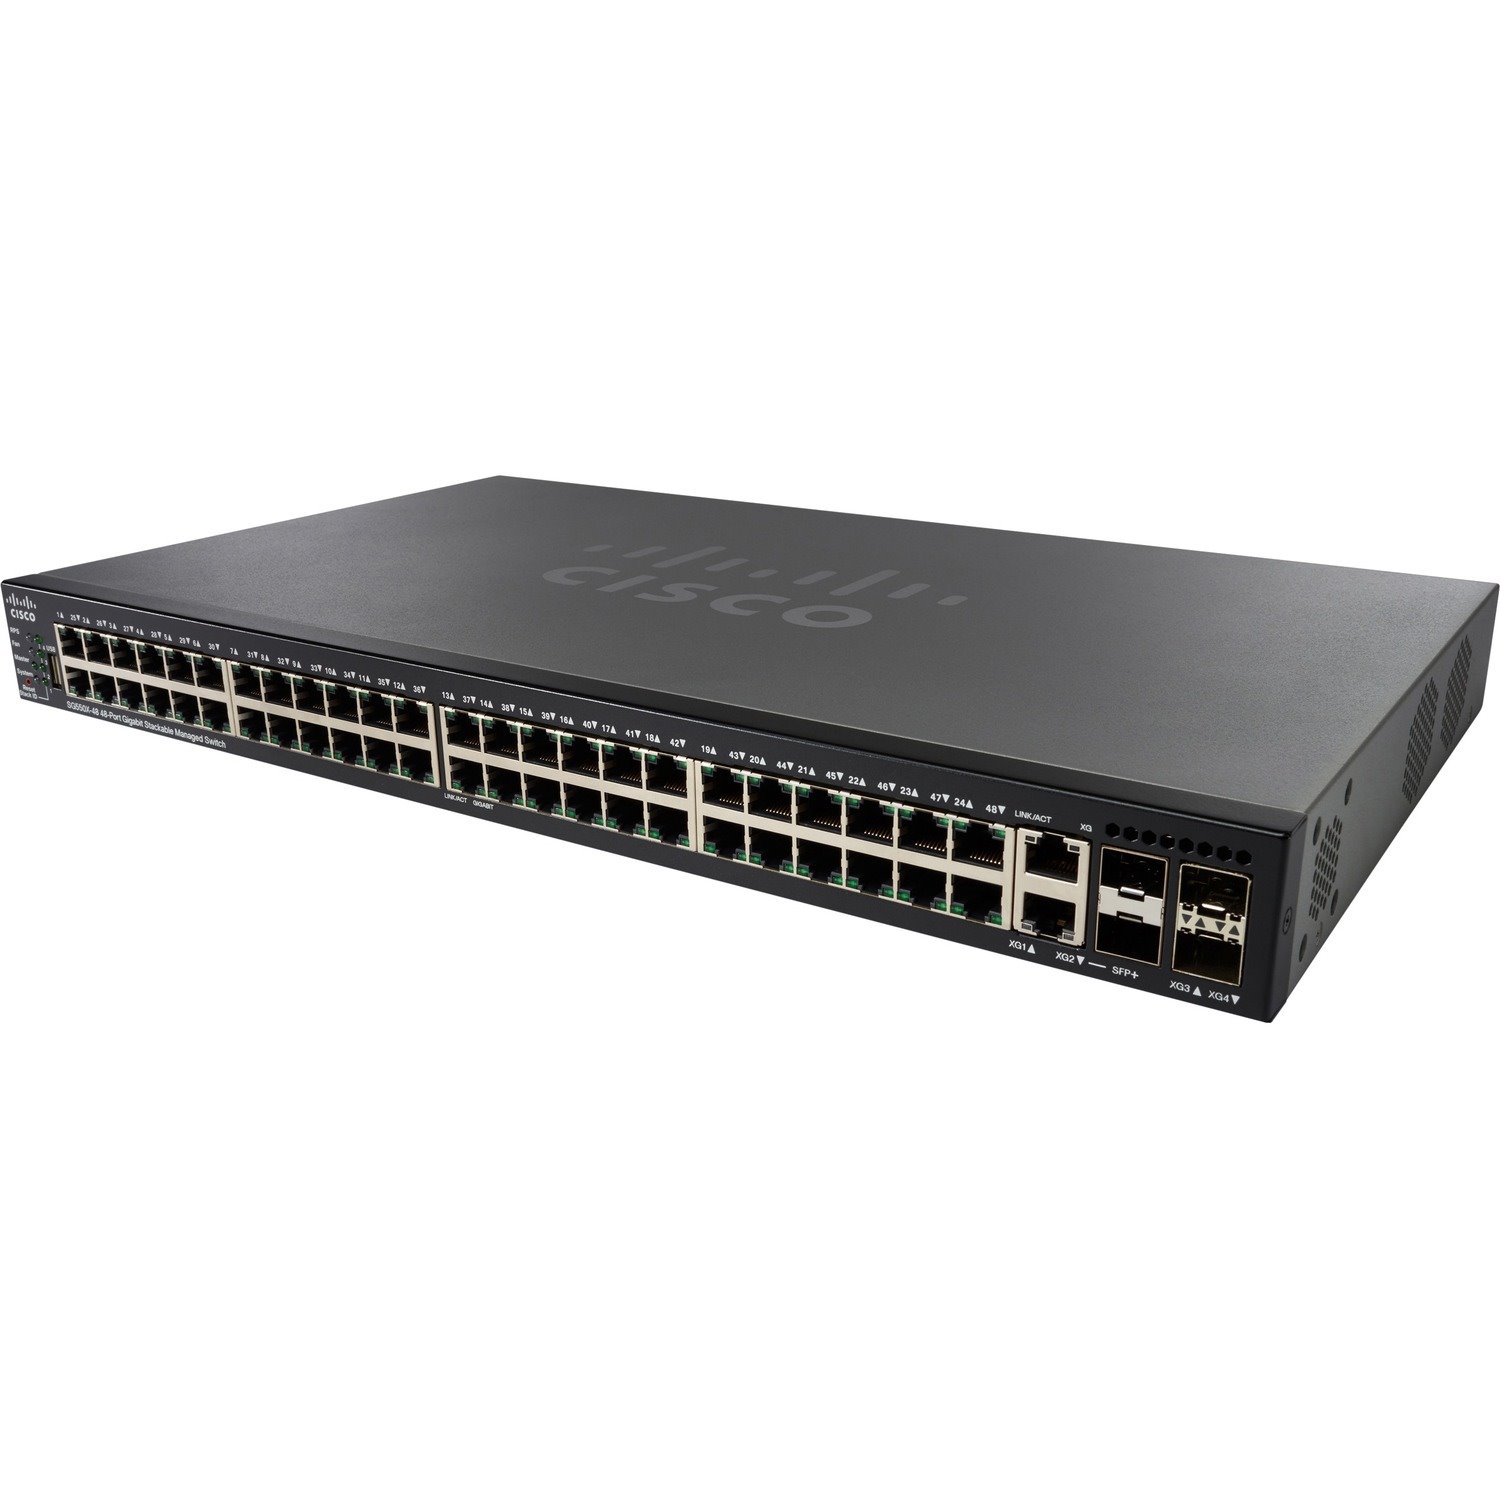 Cisco 550X SG550X-48 48 Ports Manageable Layer 3 Switch - Gigabit Ethernet